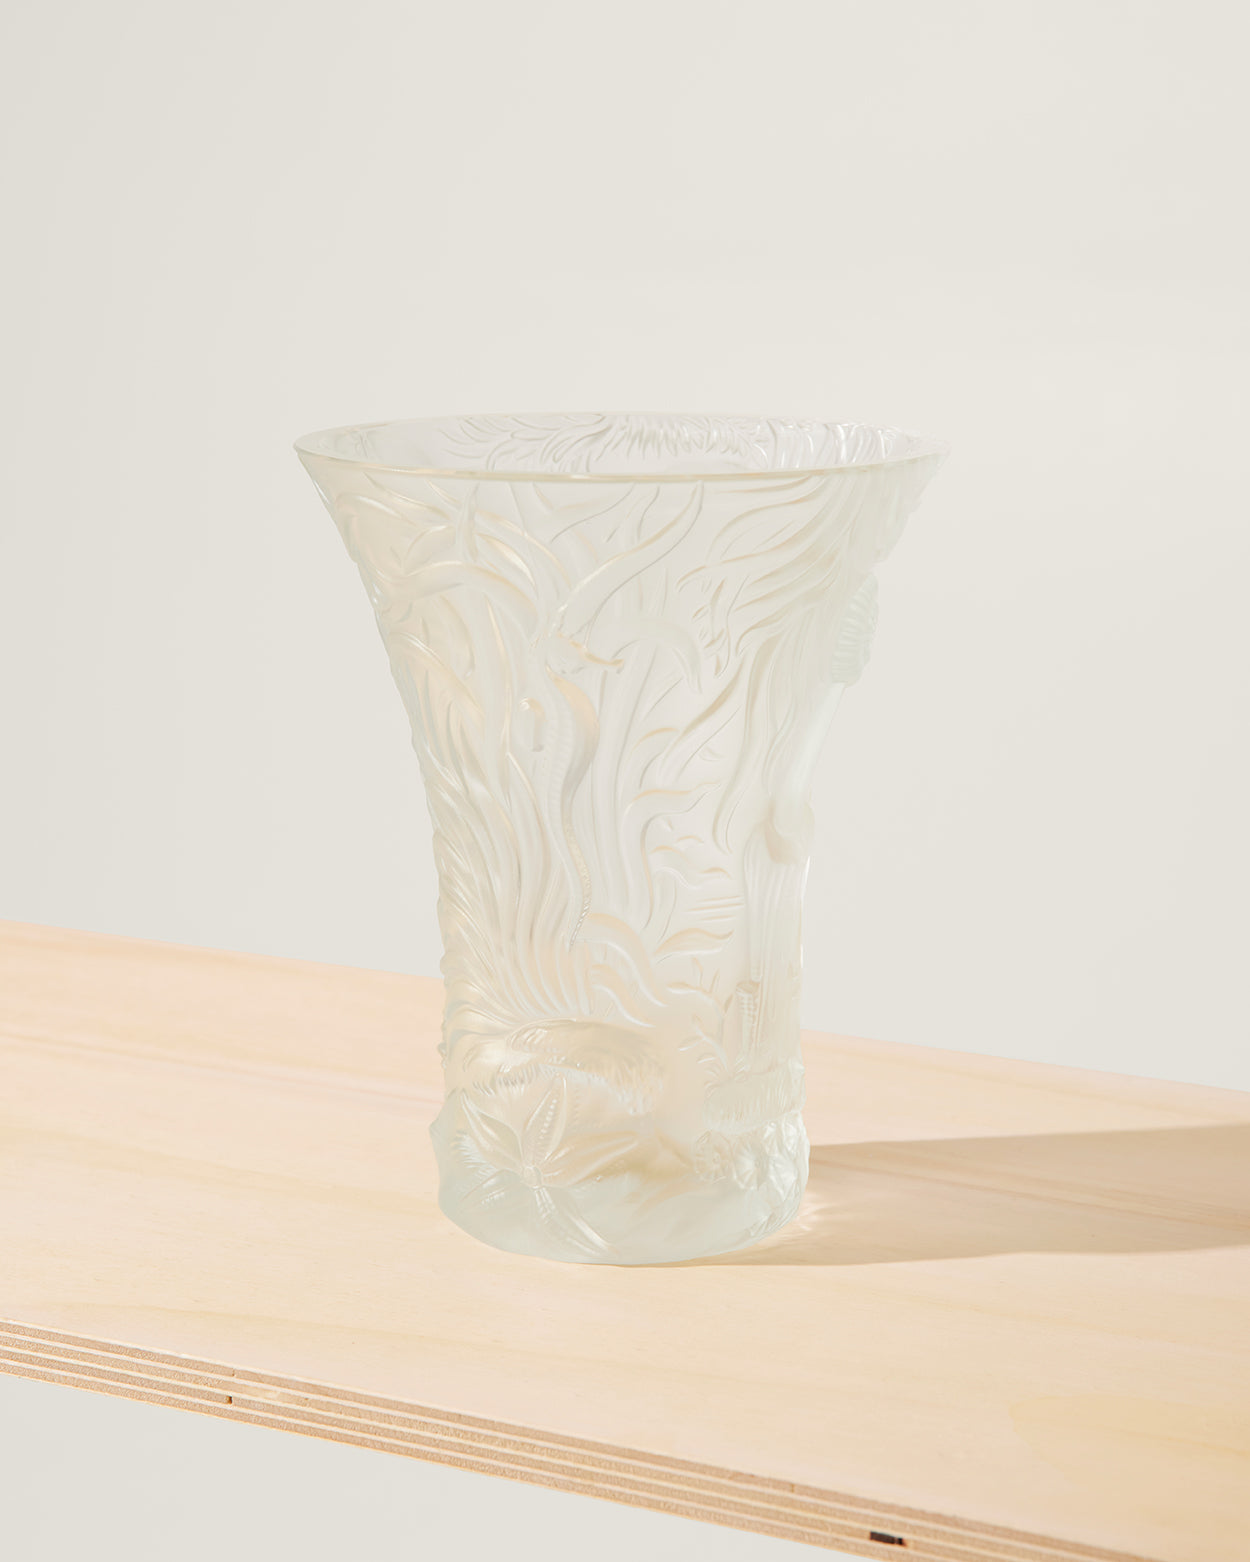 Akua Objects Glassware. Mouth blown and handmade Bohemian Glassware. Made in Bohemia. The Gustav Vase. With the Scandinavian heritage deeply rooted in Akua Objects values, a true appreciation for nature is deeply ingrained. With nature as a strong source of inspiration in the designs, it is also the core of Akua Objects products, due to glassware being made from sand.